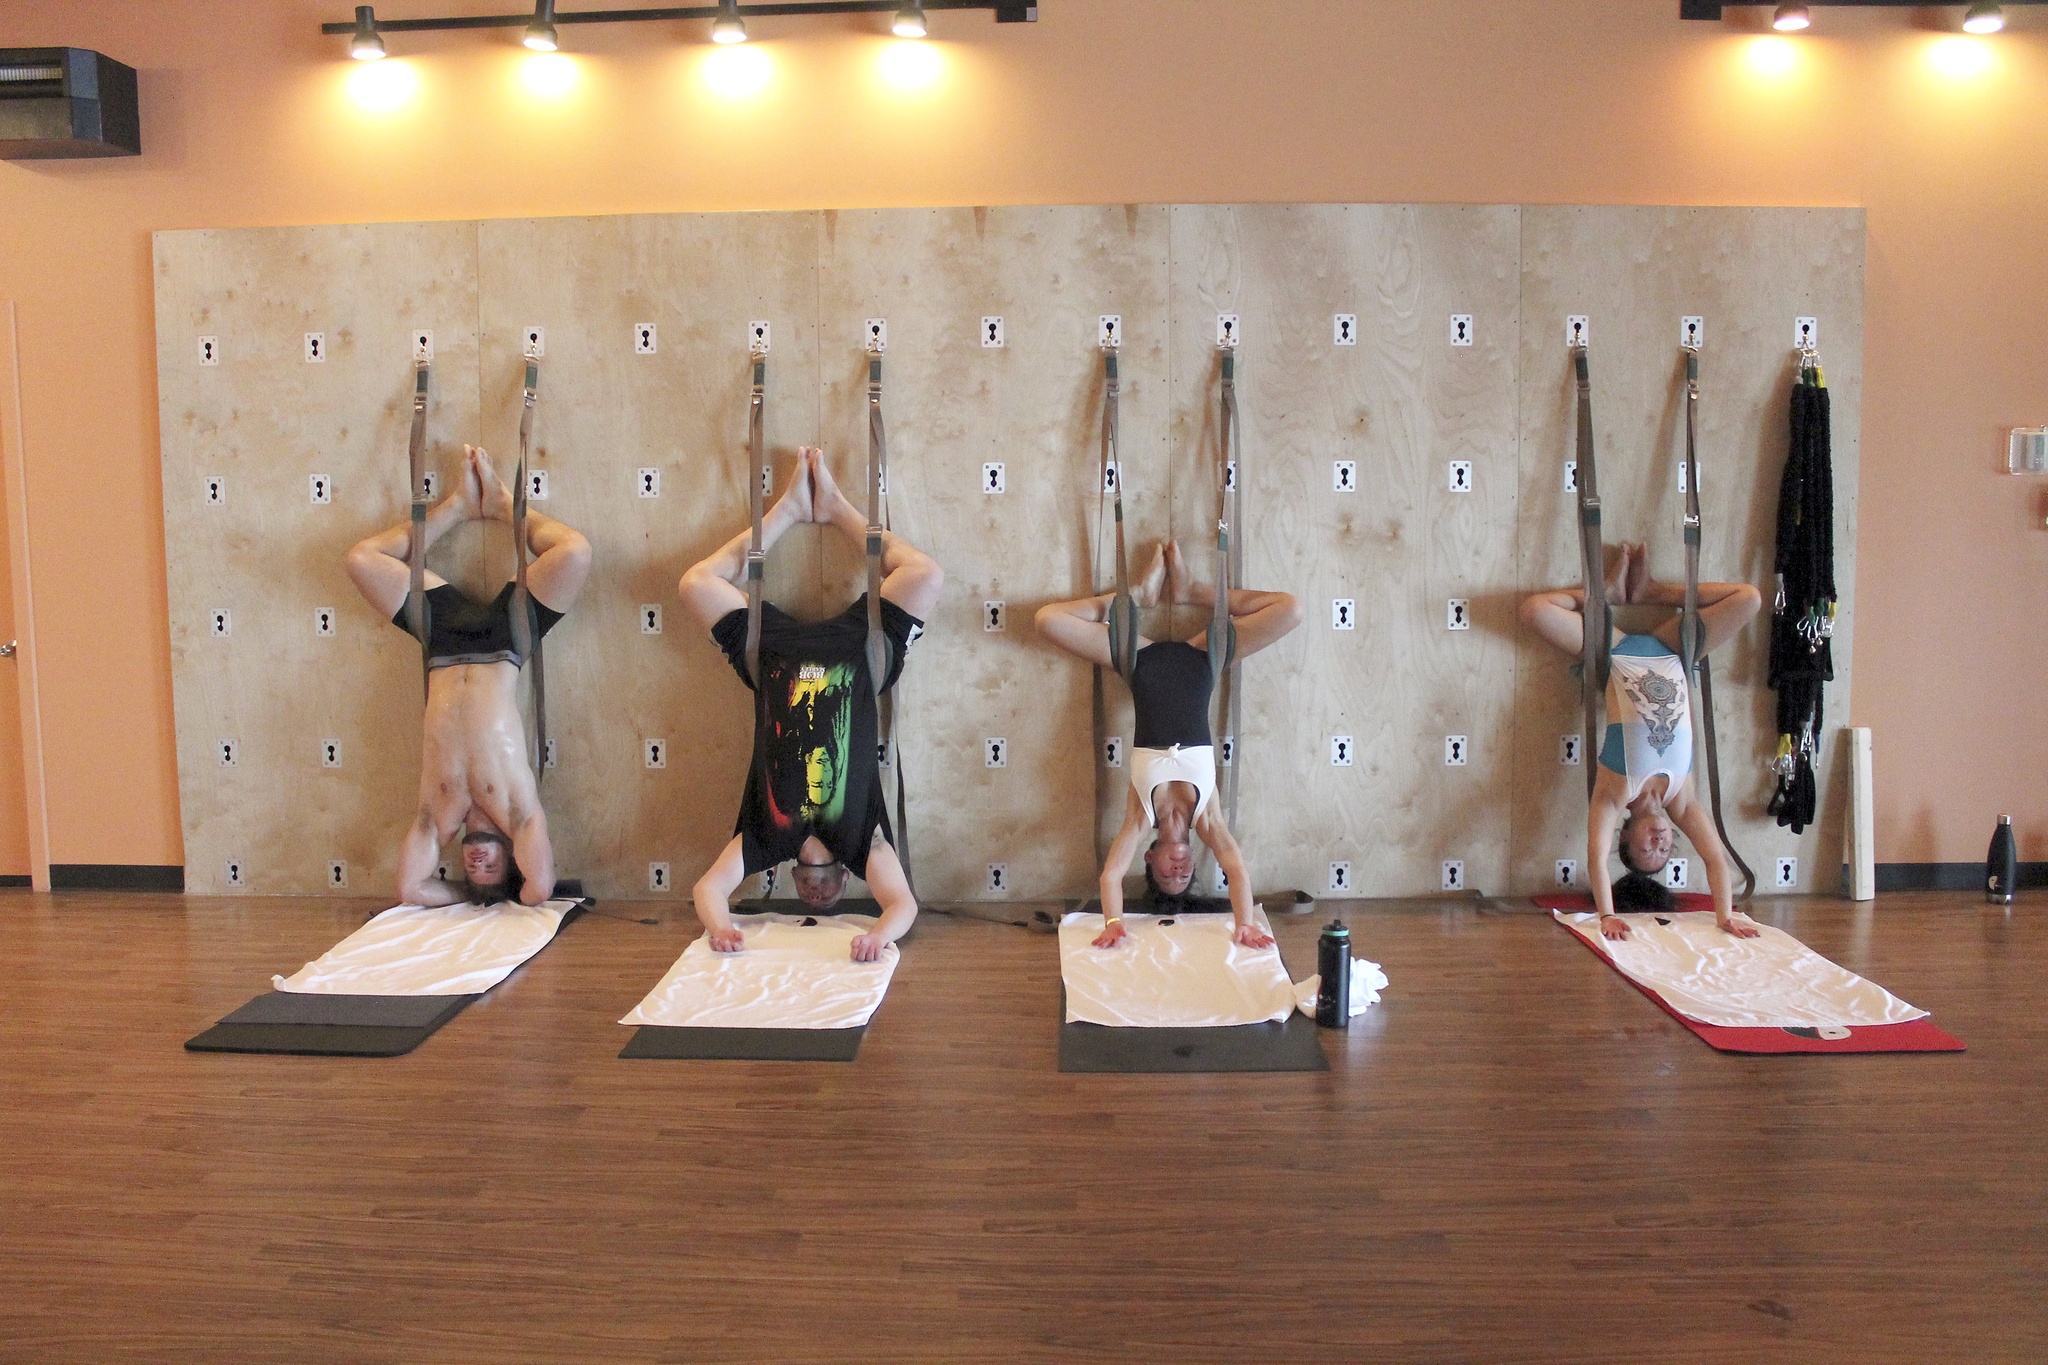 Three Hot Yoga regulars get to experience the yoga wall for the first time with owner and CEO Linda Burch. JEROD YOUNG